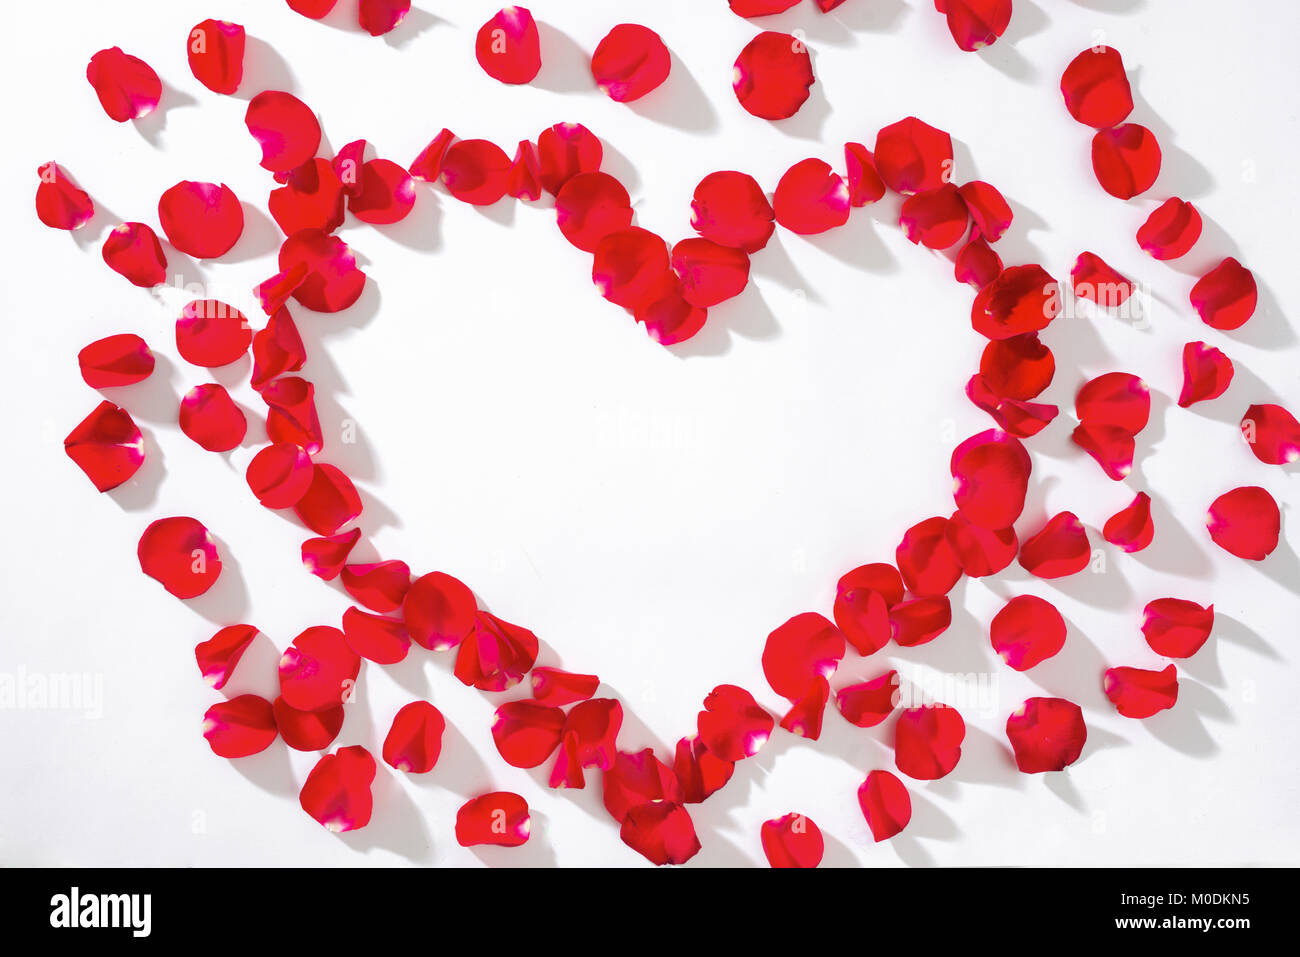 Heart of red rose petals on white background Stock Photo - Alamy